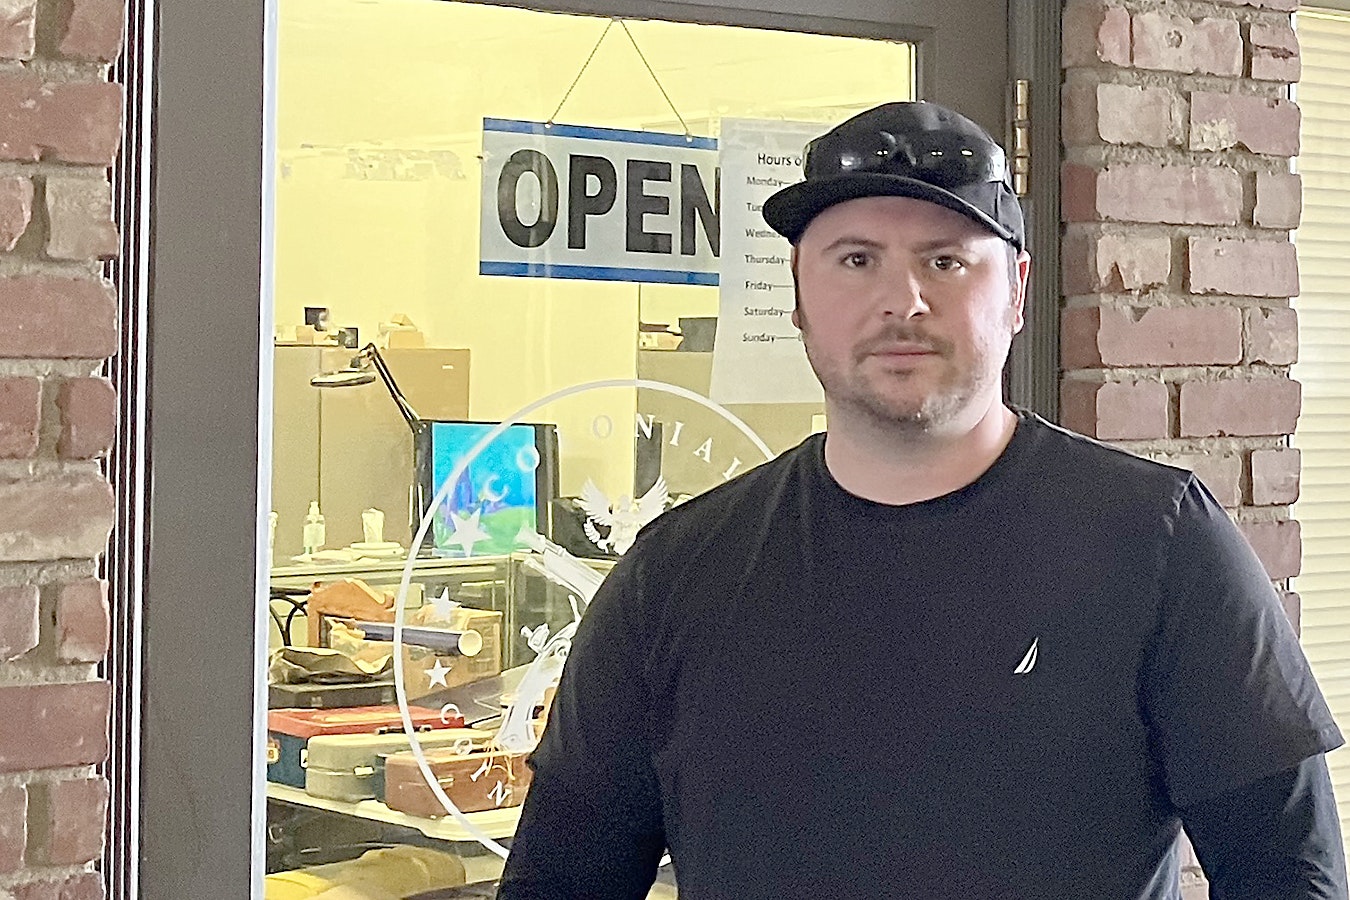 Justin Foster, owner of Colonial Coins & Currency in Casper, said accusations he conspired to steal a customer's $100,000 coin collection "destroyed my business." Charges against him have been dropped.